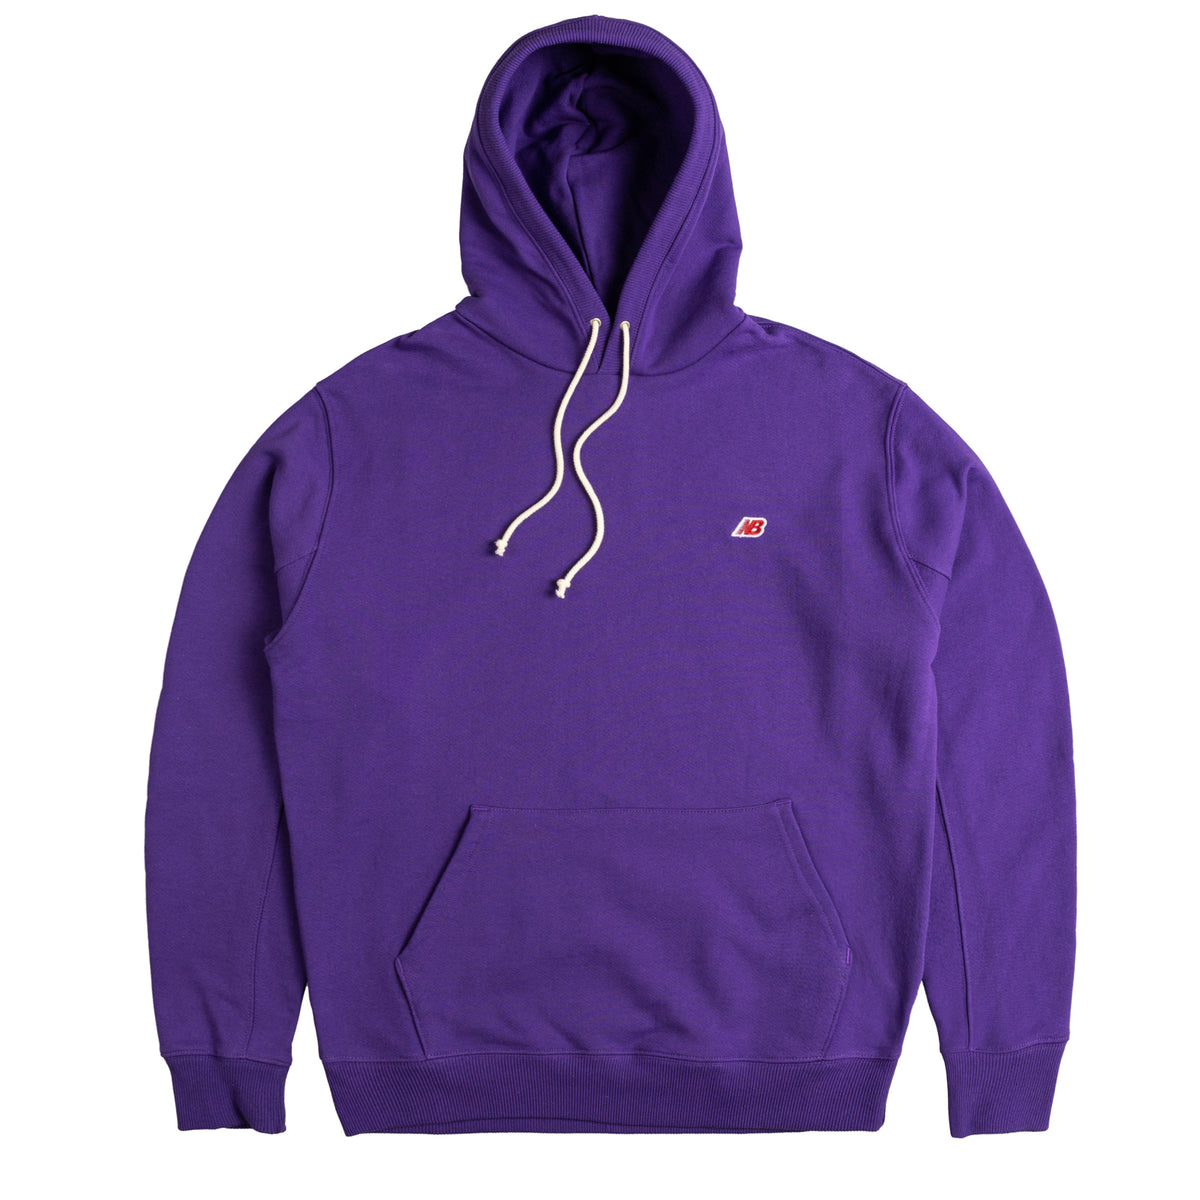 New Balance Made in USA Core Hoodie » Buy online now!